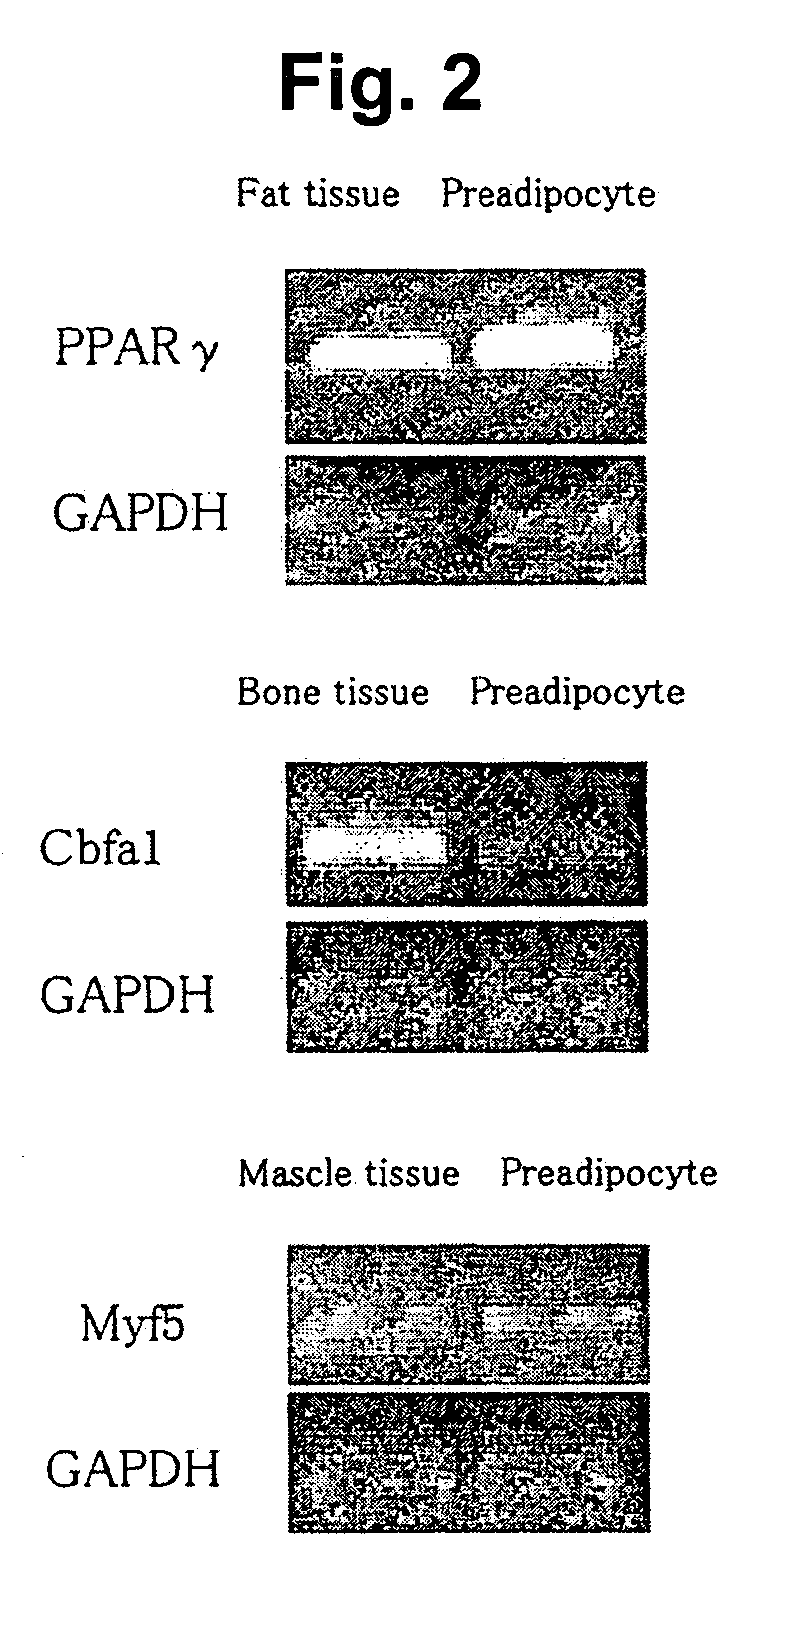 Differentiated Cells Originating in Precursor Fat Cells and Method of Acquiring the Same